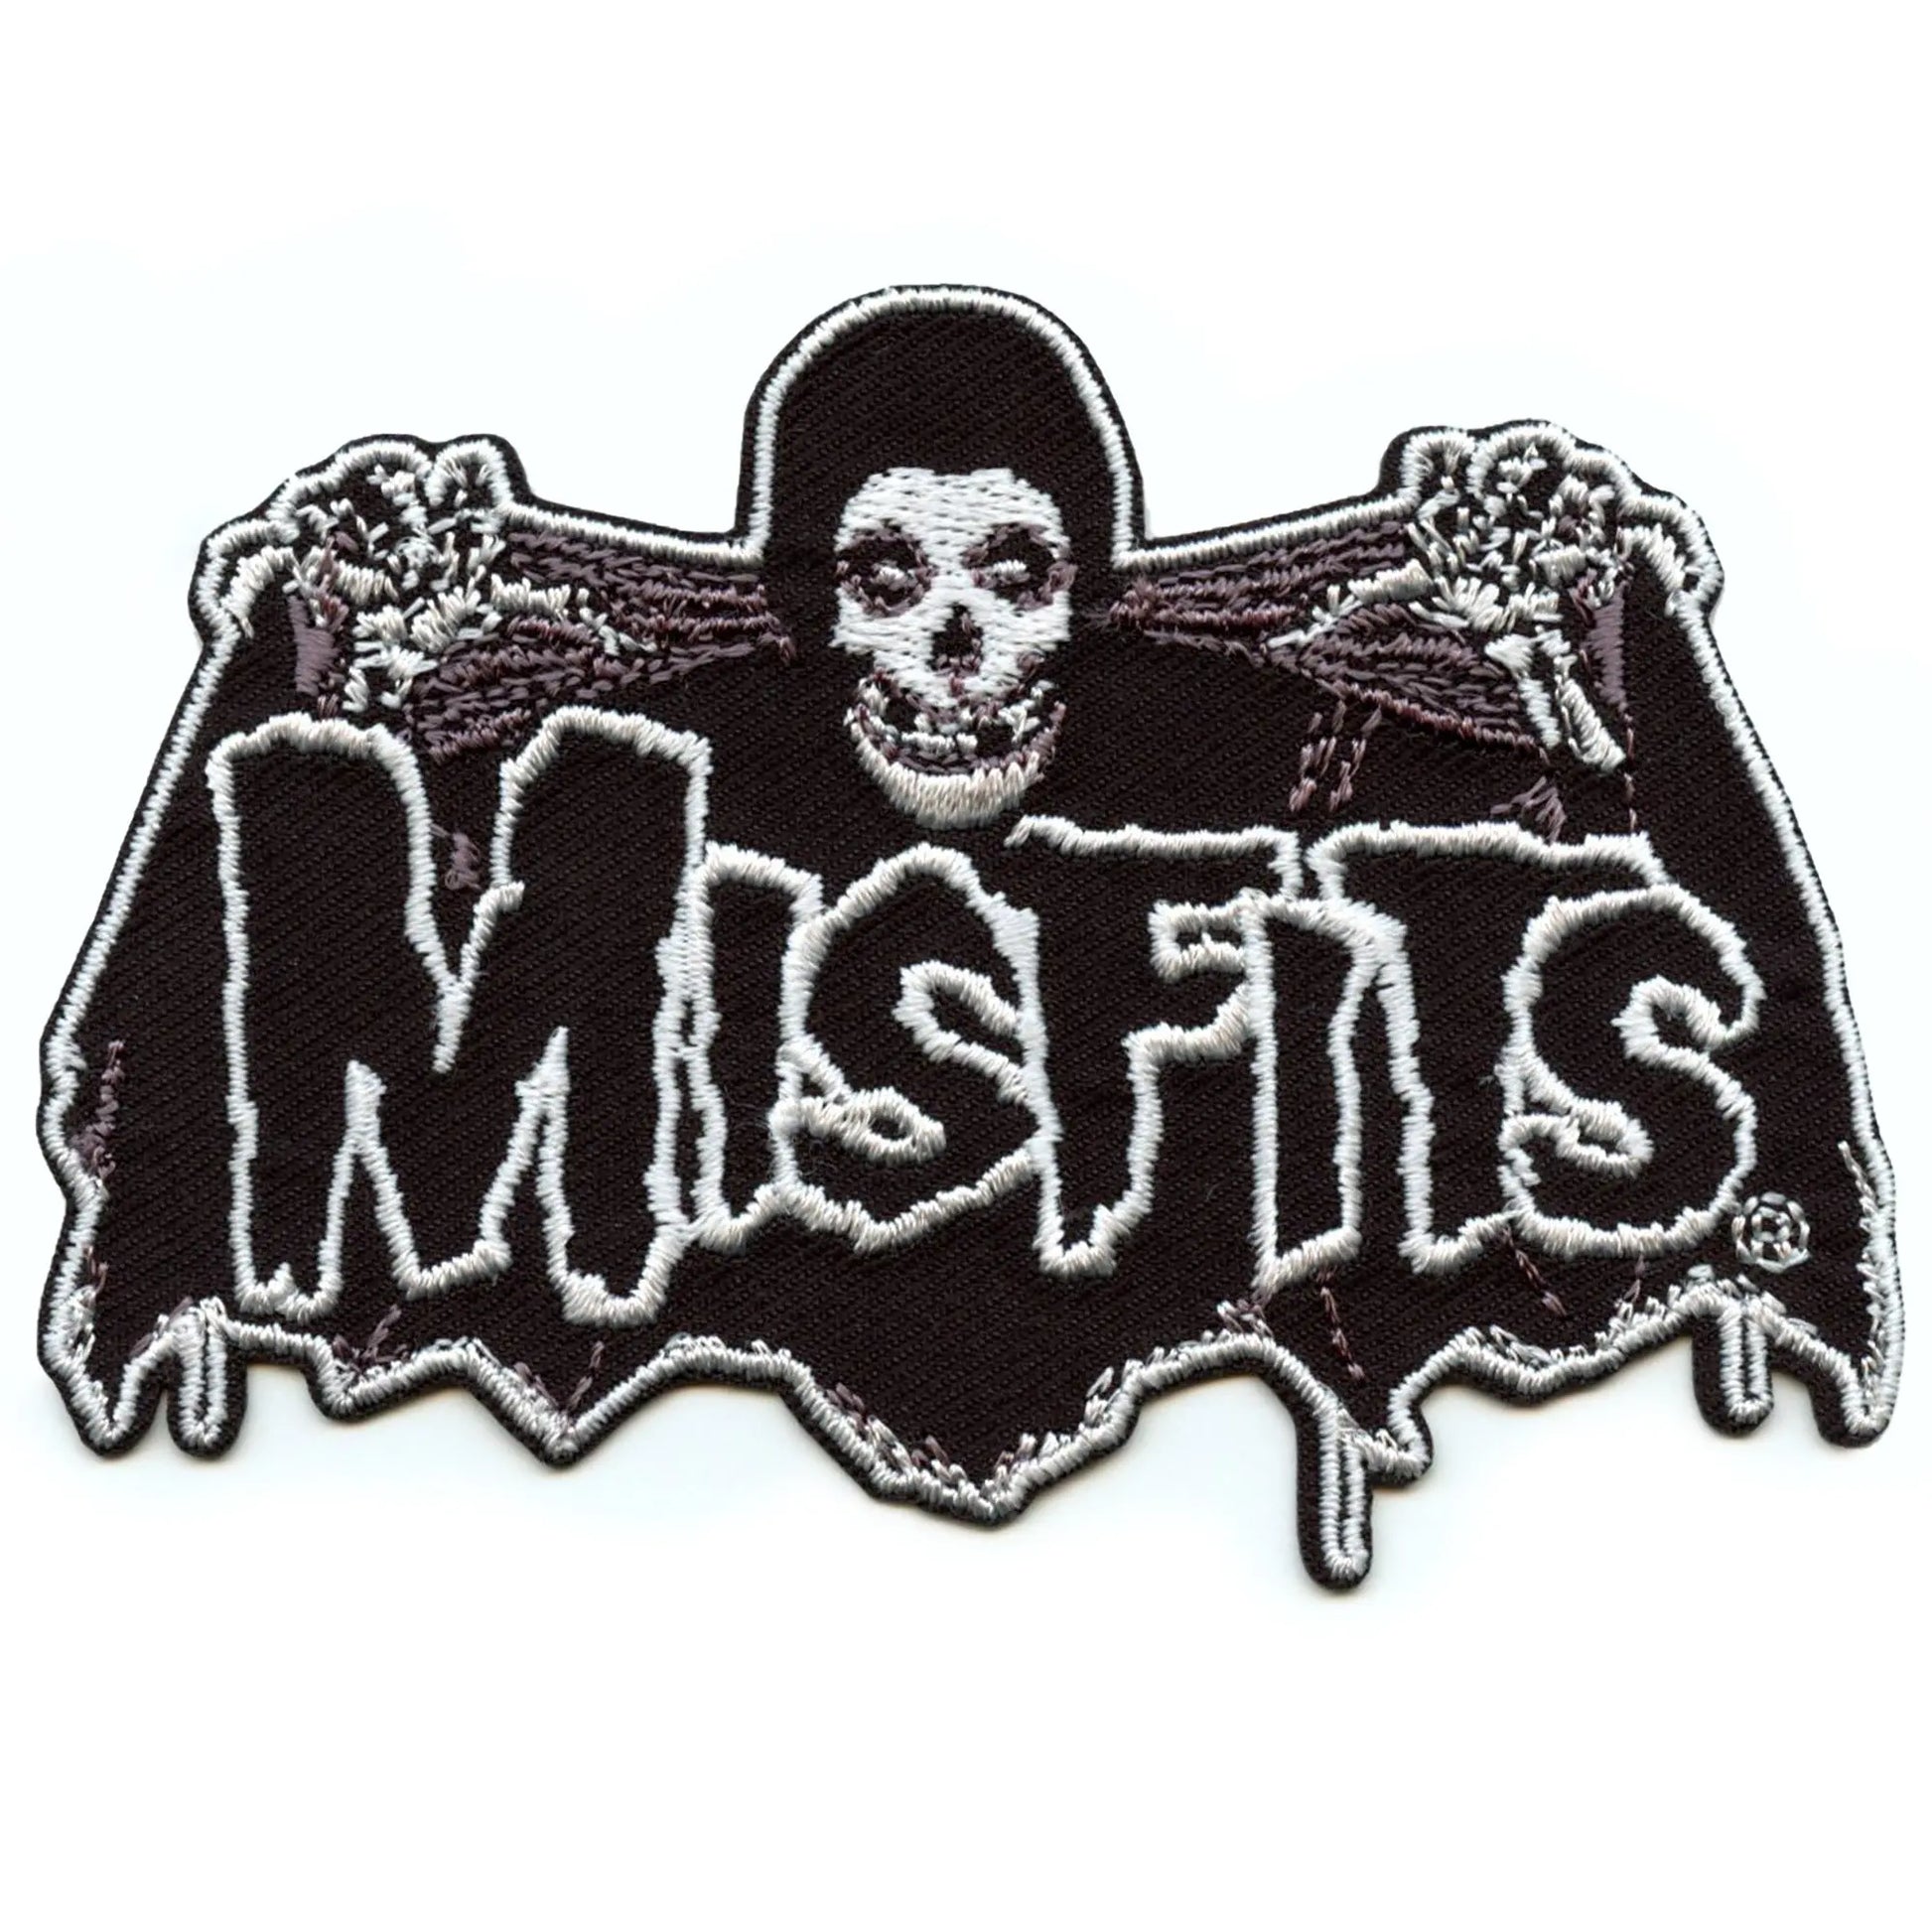 Misfits embroidered skull fiend club patch